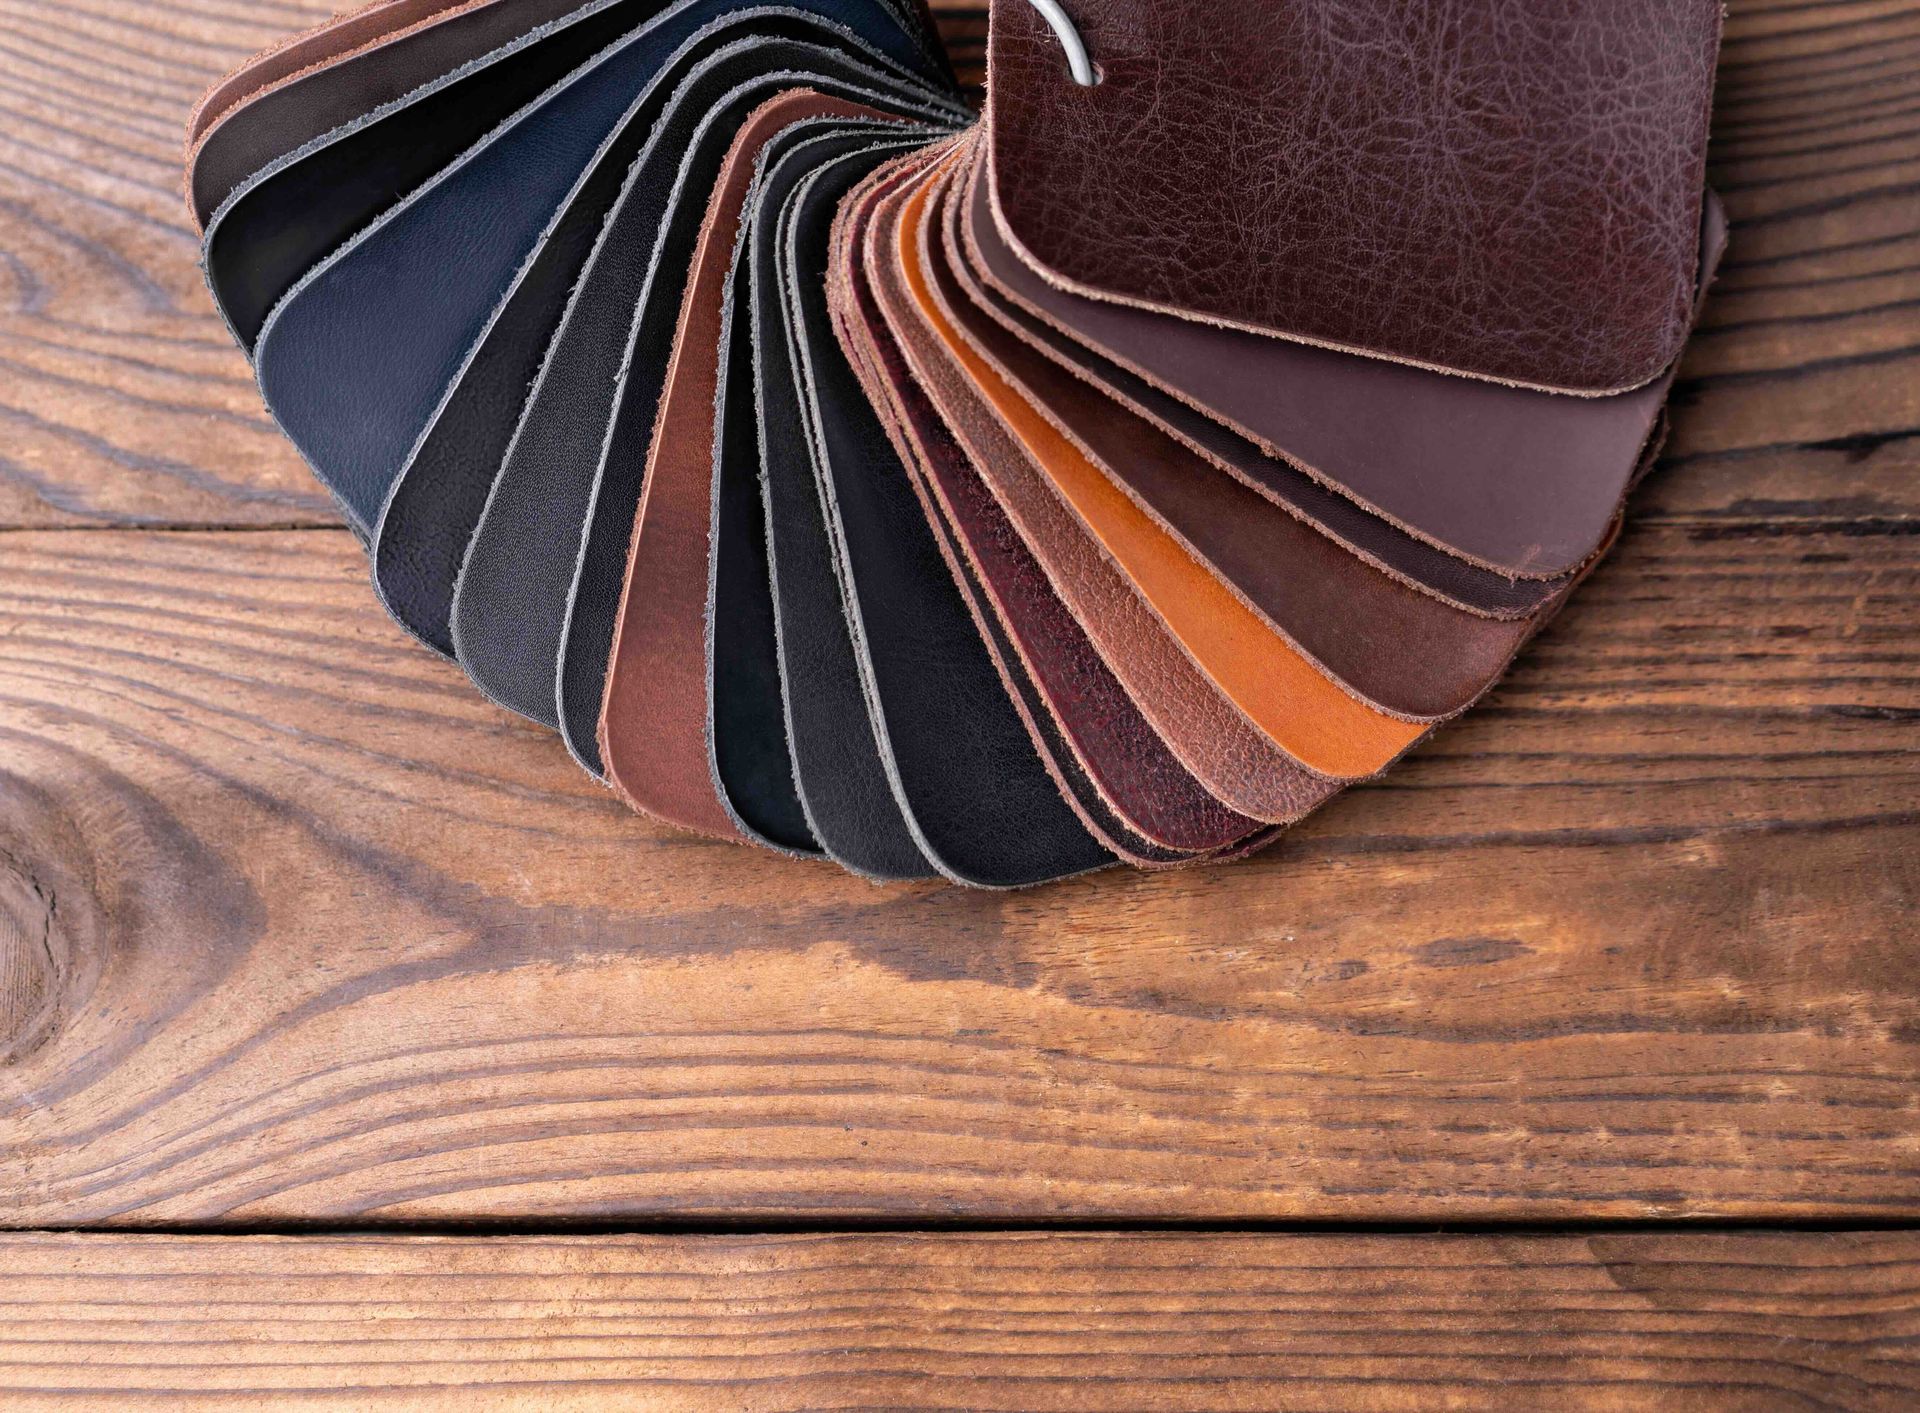 A bunch of different colored leather samples on a wooden table.